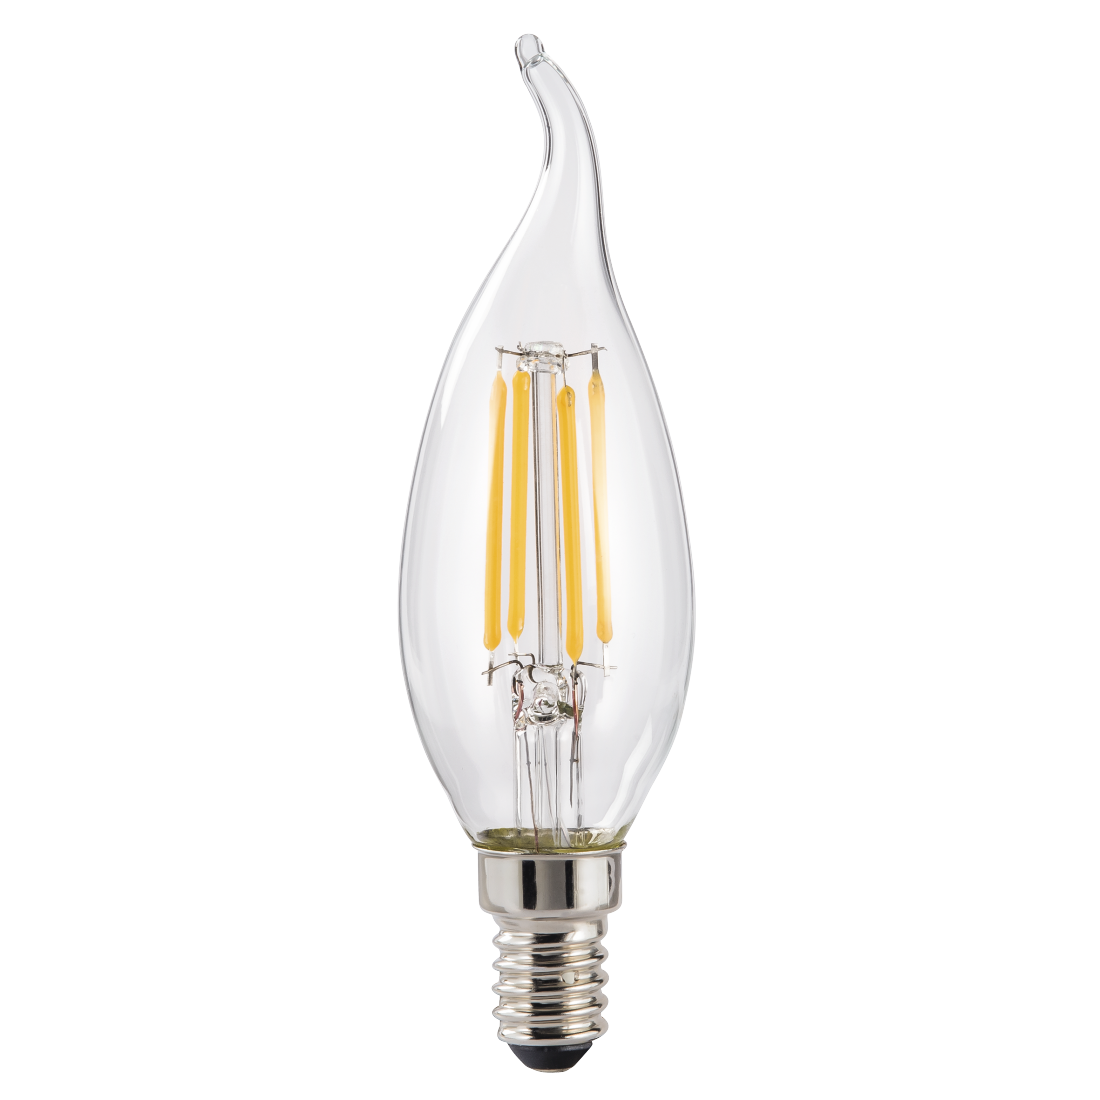 abx High-Res Image - Xavax, LED Filament, E14, 470 lm replaces 40 W, Flickering Candle, warm white